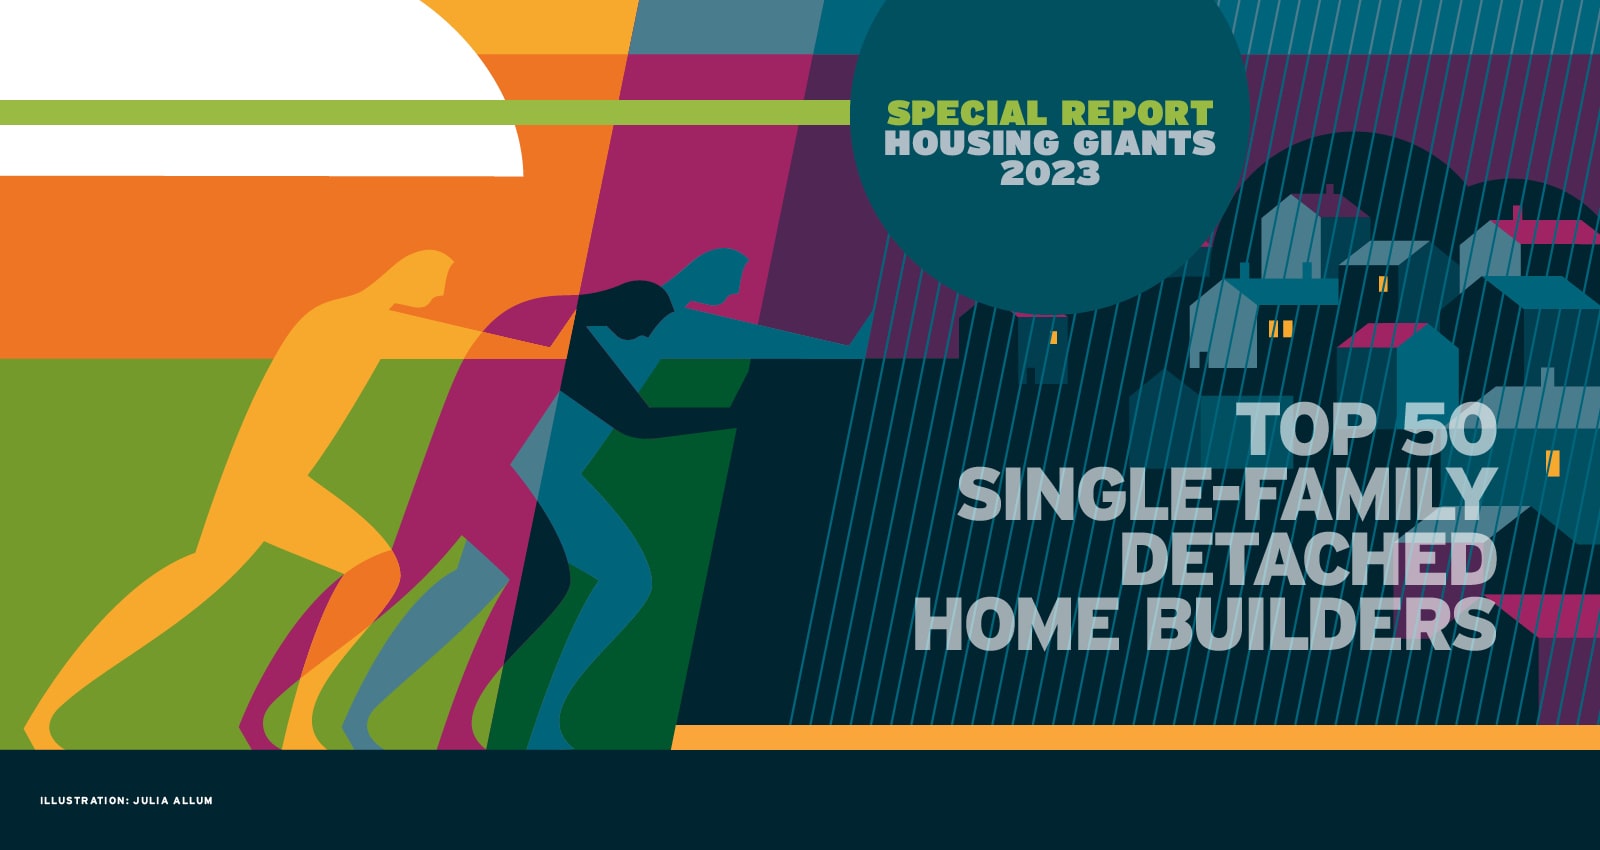 2023 Housing Giants ranked list of top 50 single-family detached home builders